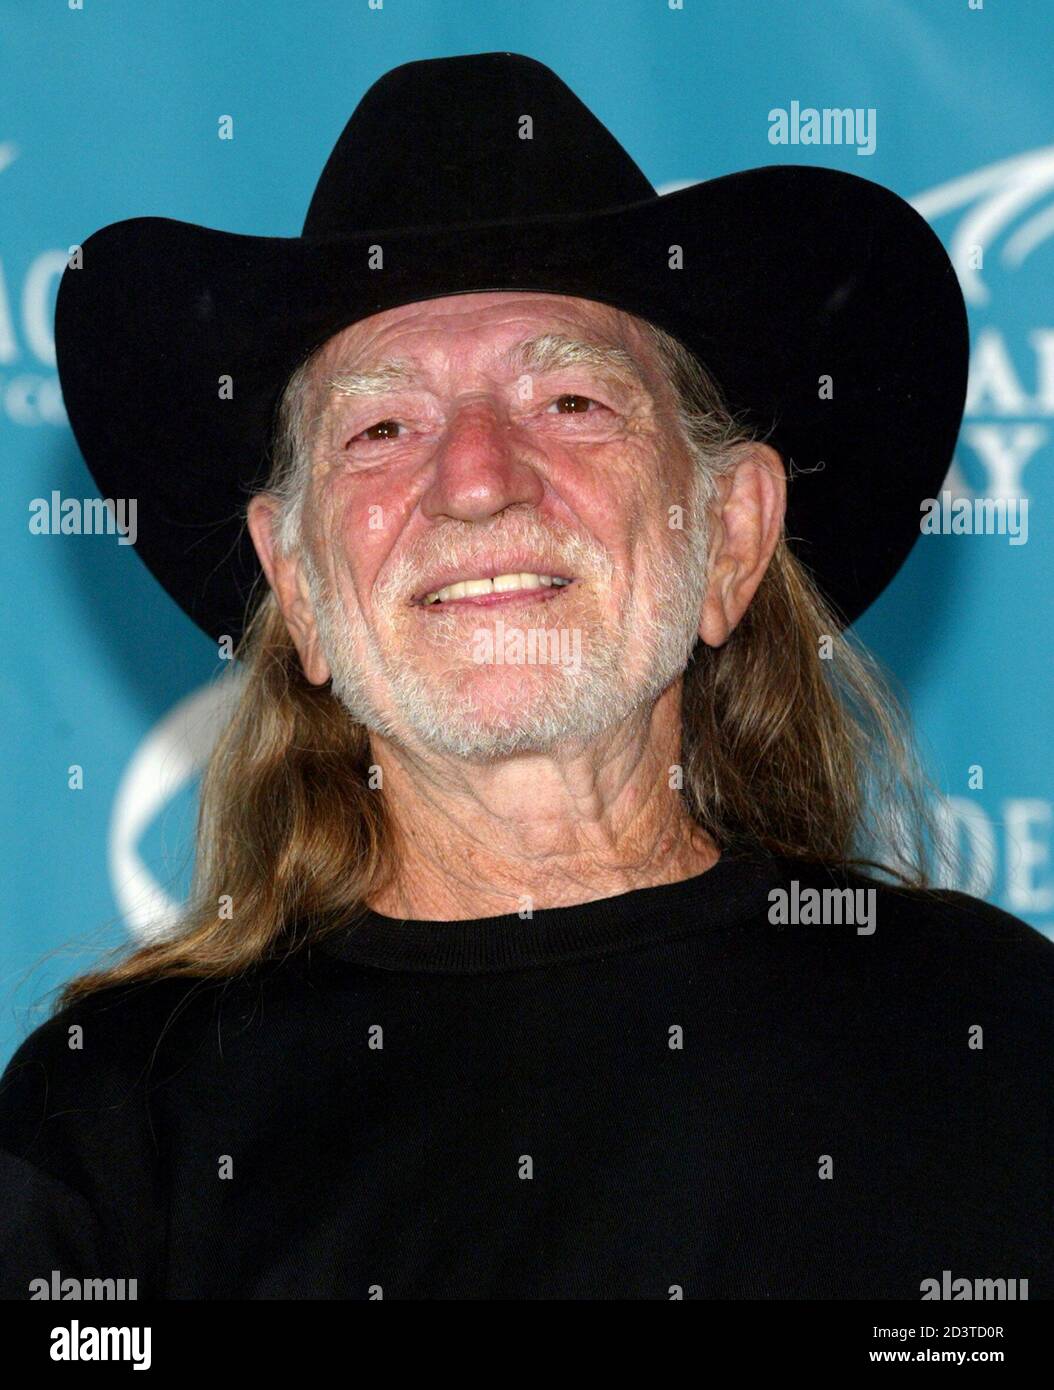 Country legend Willie Nelson smiles backstage at the 39th annual Academy of Country Music Awards at the Mandalay Bay Events Center in Las Vegas, Nevada, May 26, 2004. [Nelson received the Gene Weed Special Achievement Award at the show.] Stock Photo